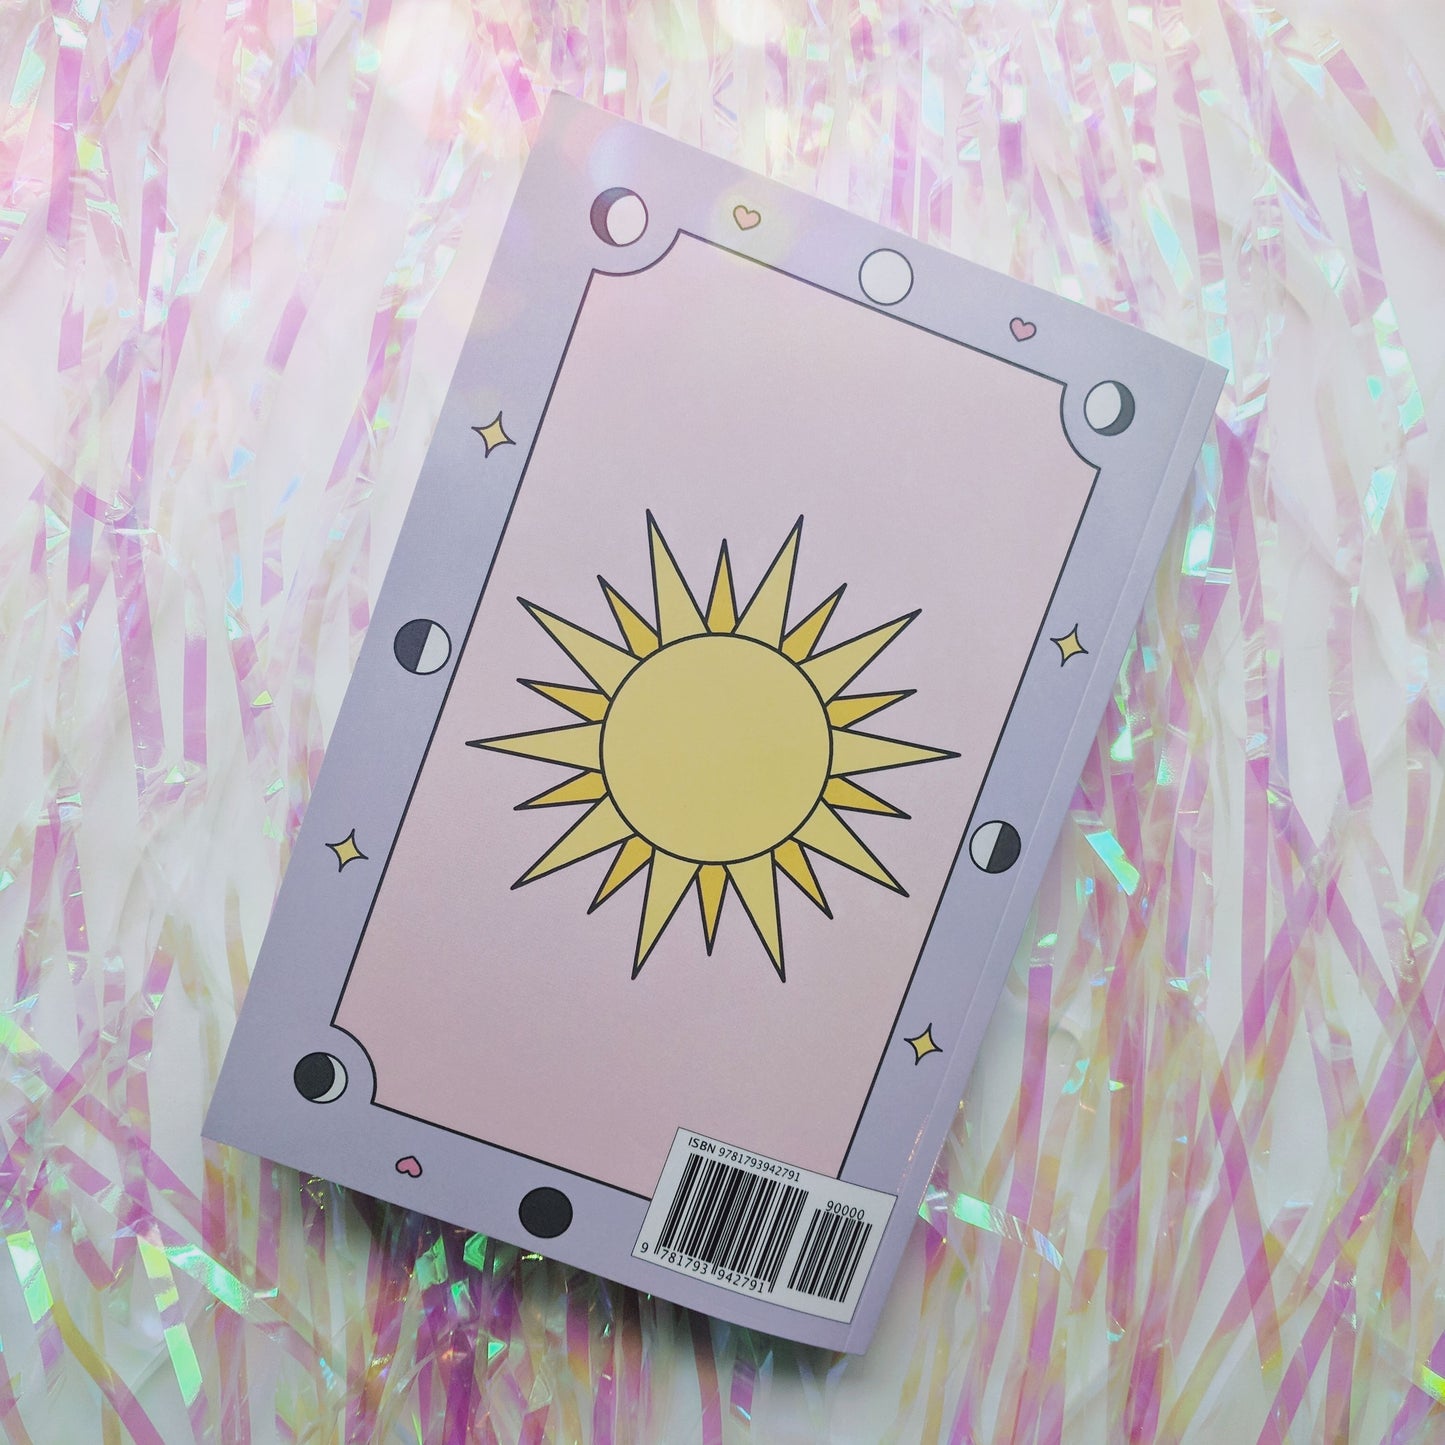 The Pastel Magic Book of Tarot Spreads: Divining and Journaling Your Way to Your Higher Self